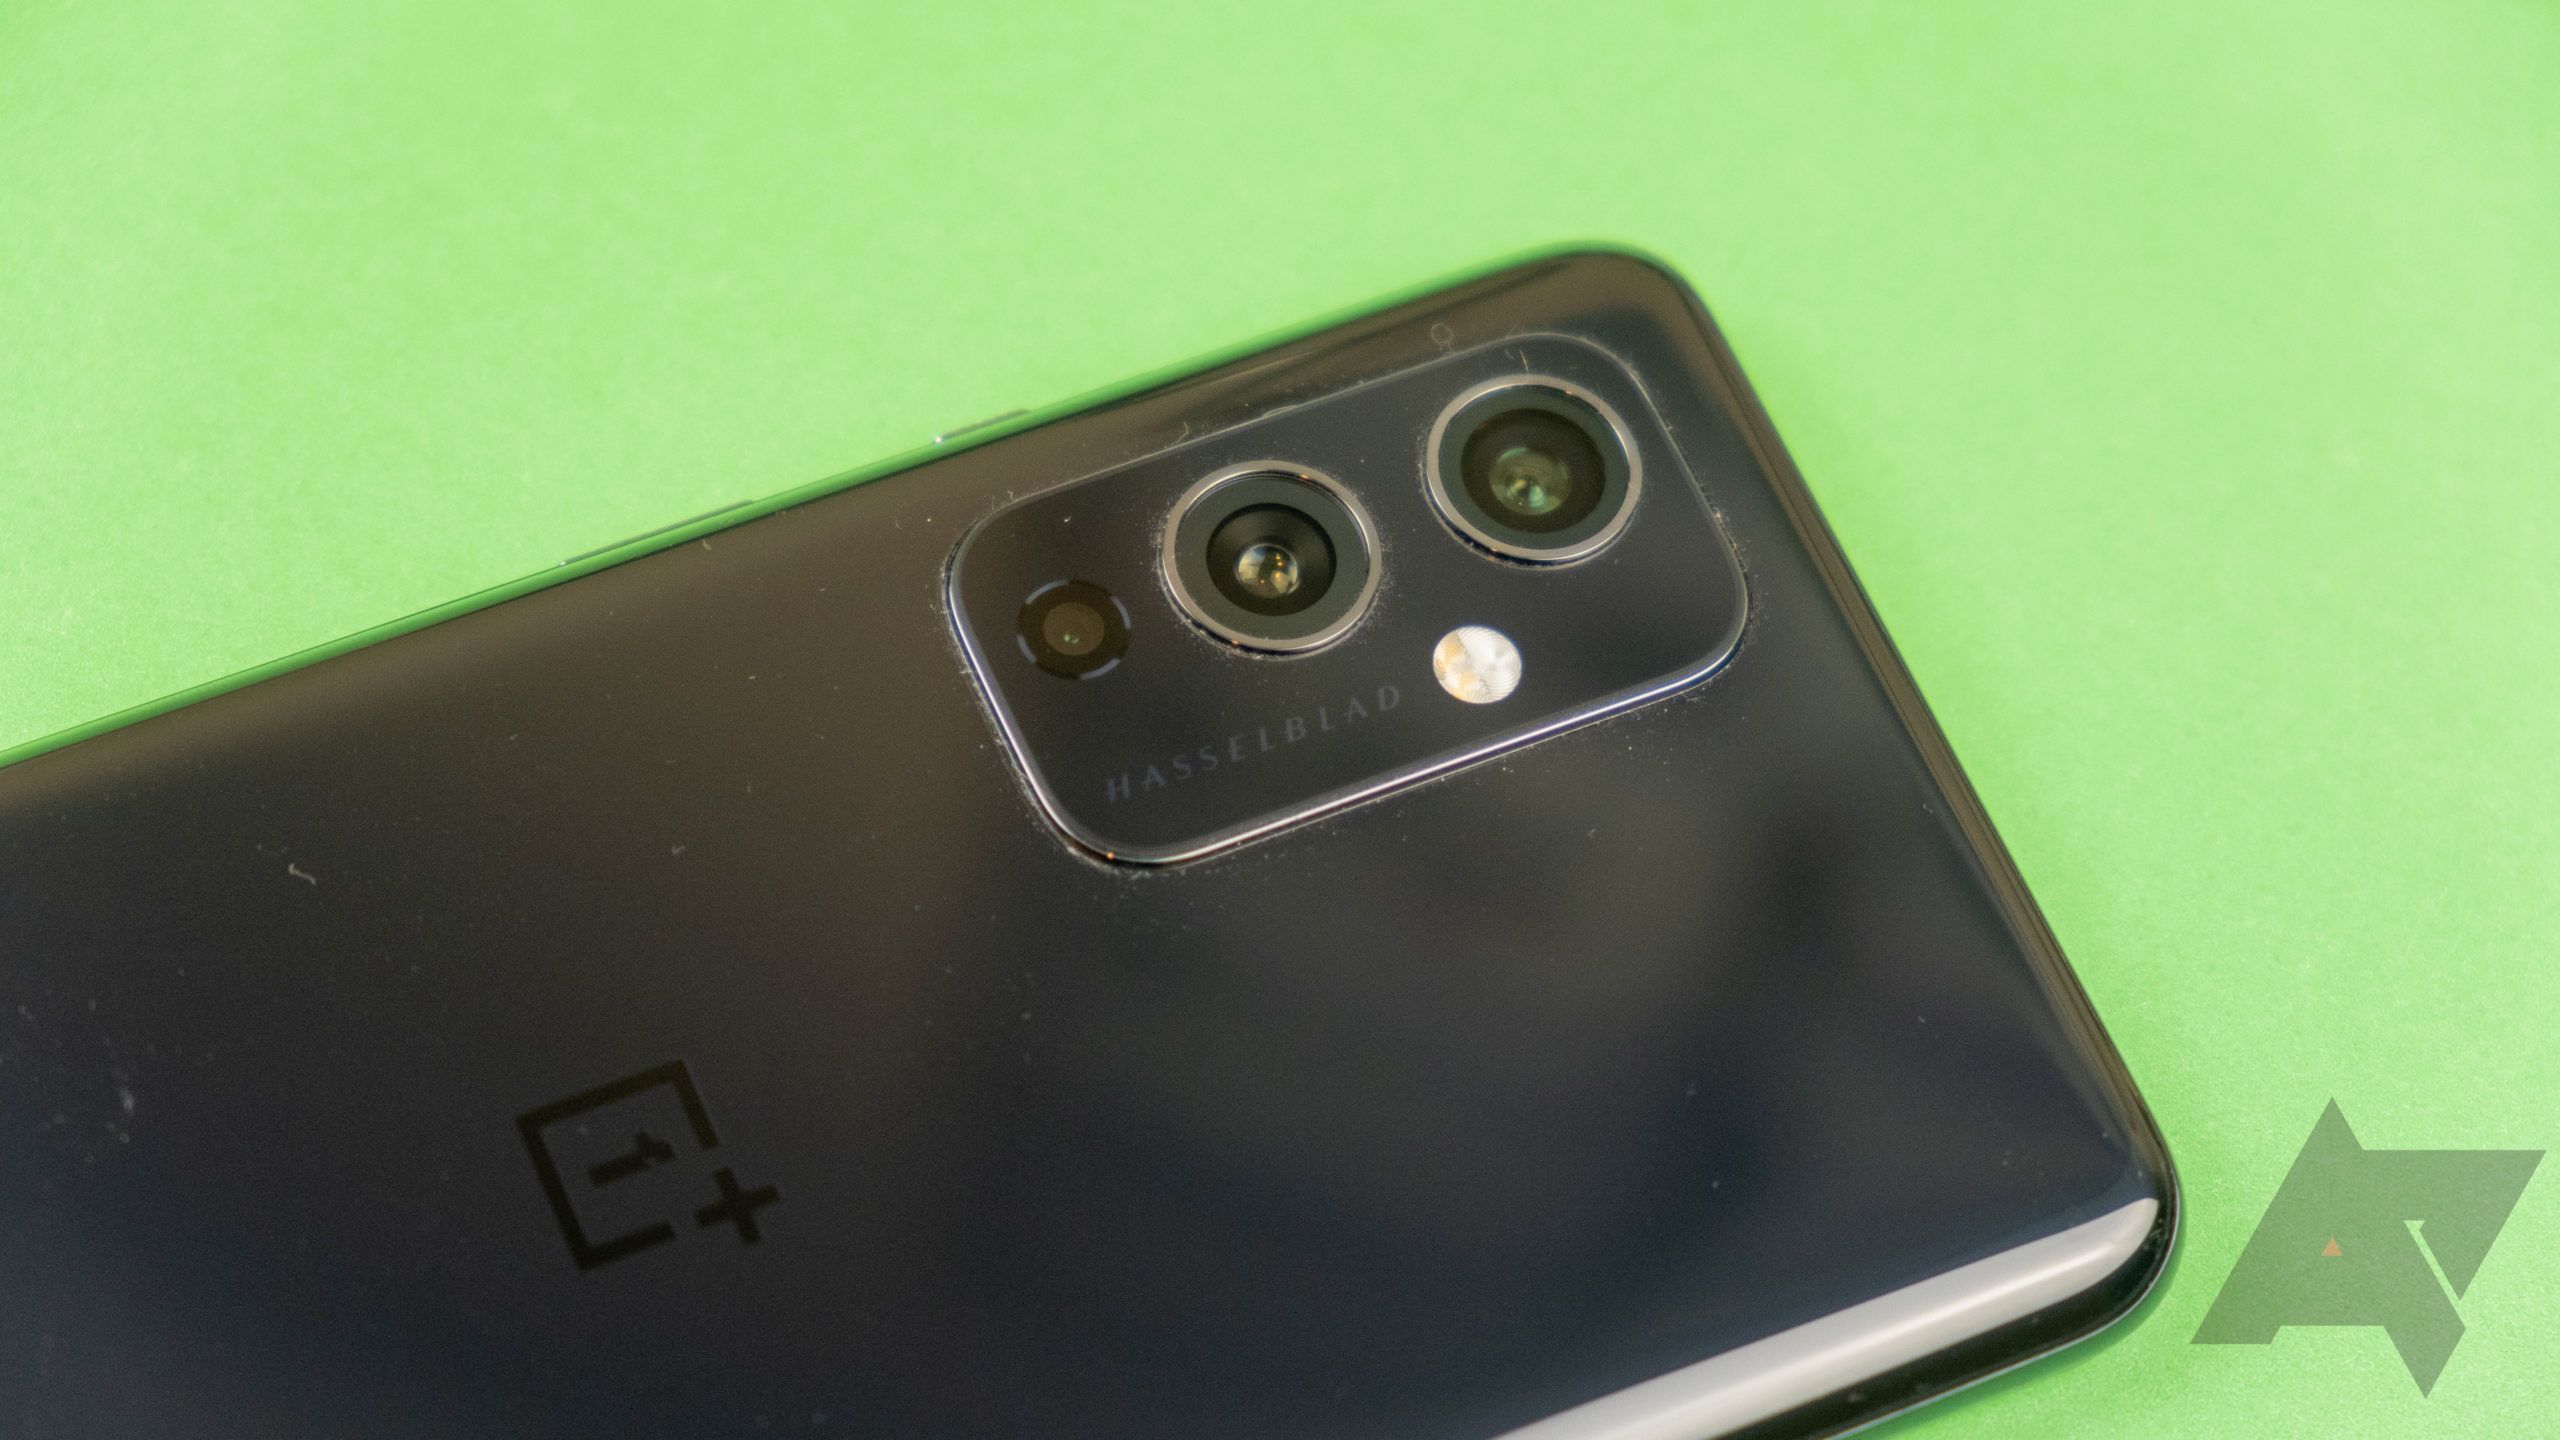 OnePlus 9 review: The end of an era